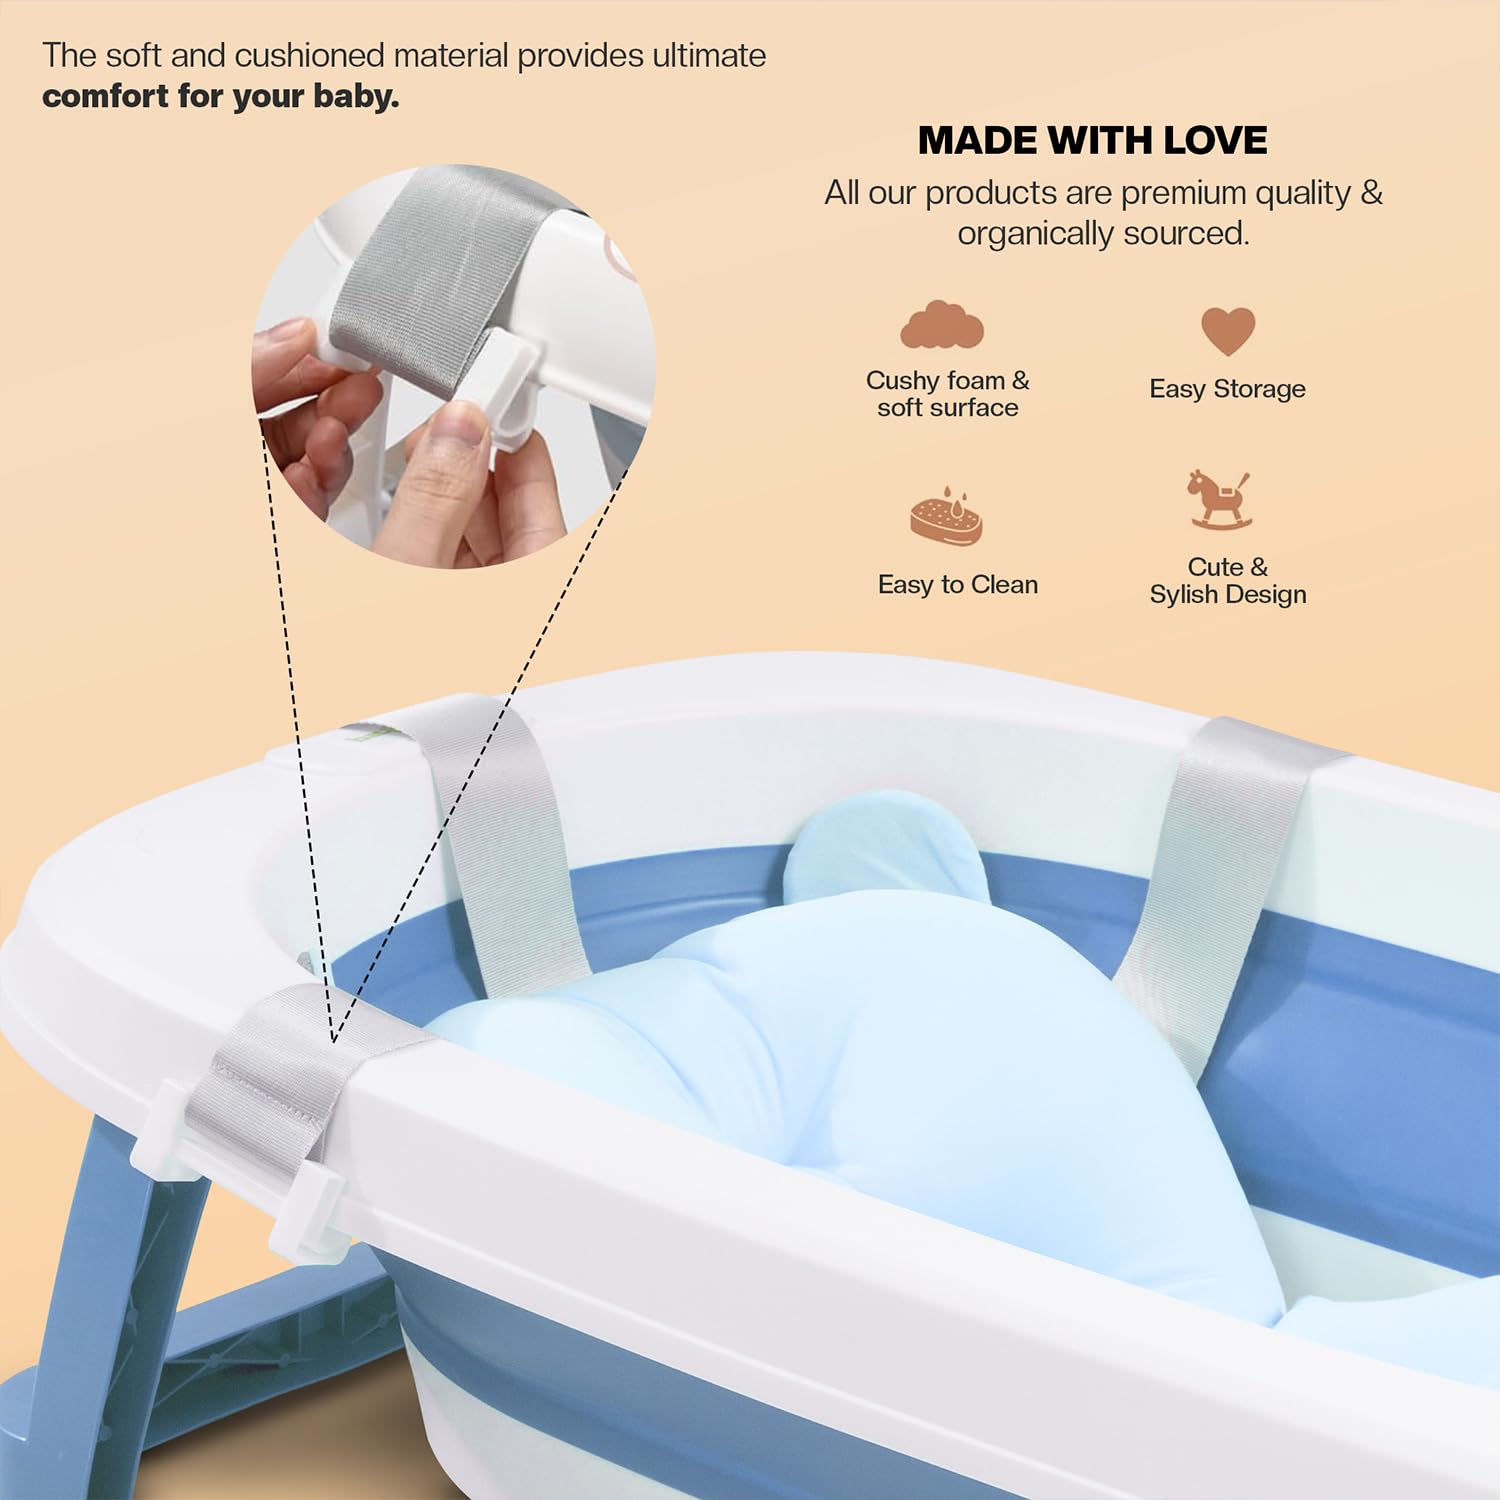 Minikin Avery Collapsible Bathtub for Kids I Fold after Use I Support Cushion & Drainer I 1-3 Years